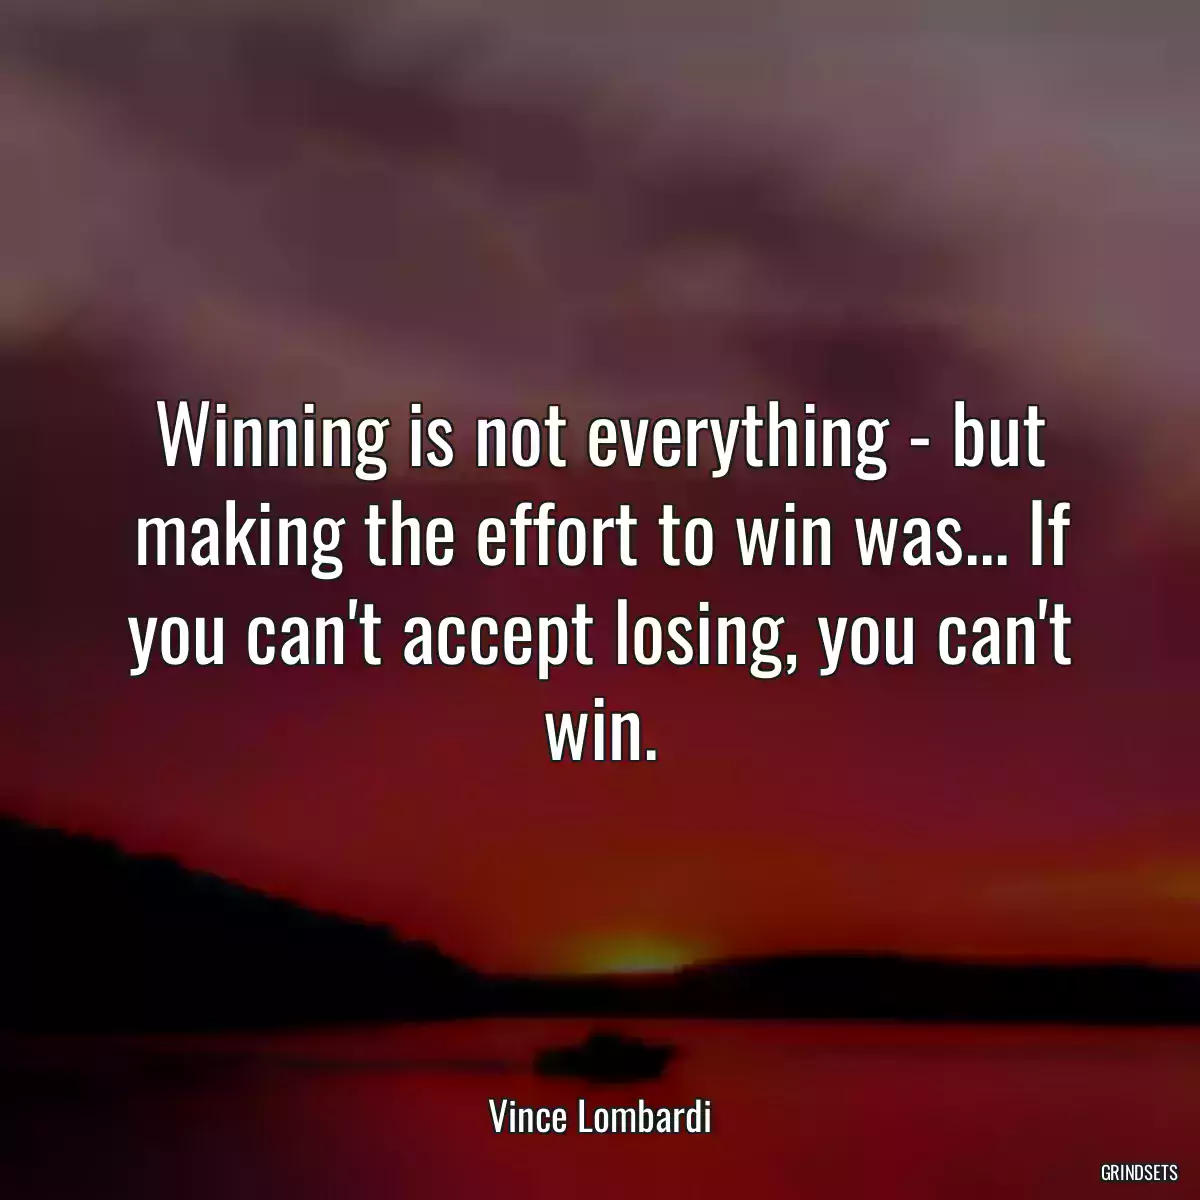 Winning is not everything - but making the effort to win was... If you can\'t accept losing, you can\'t win.